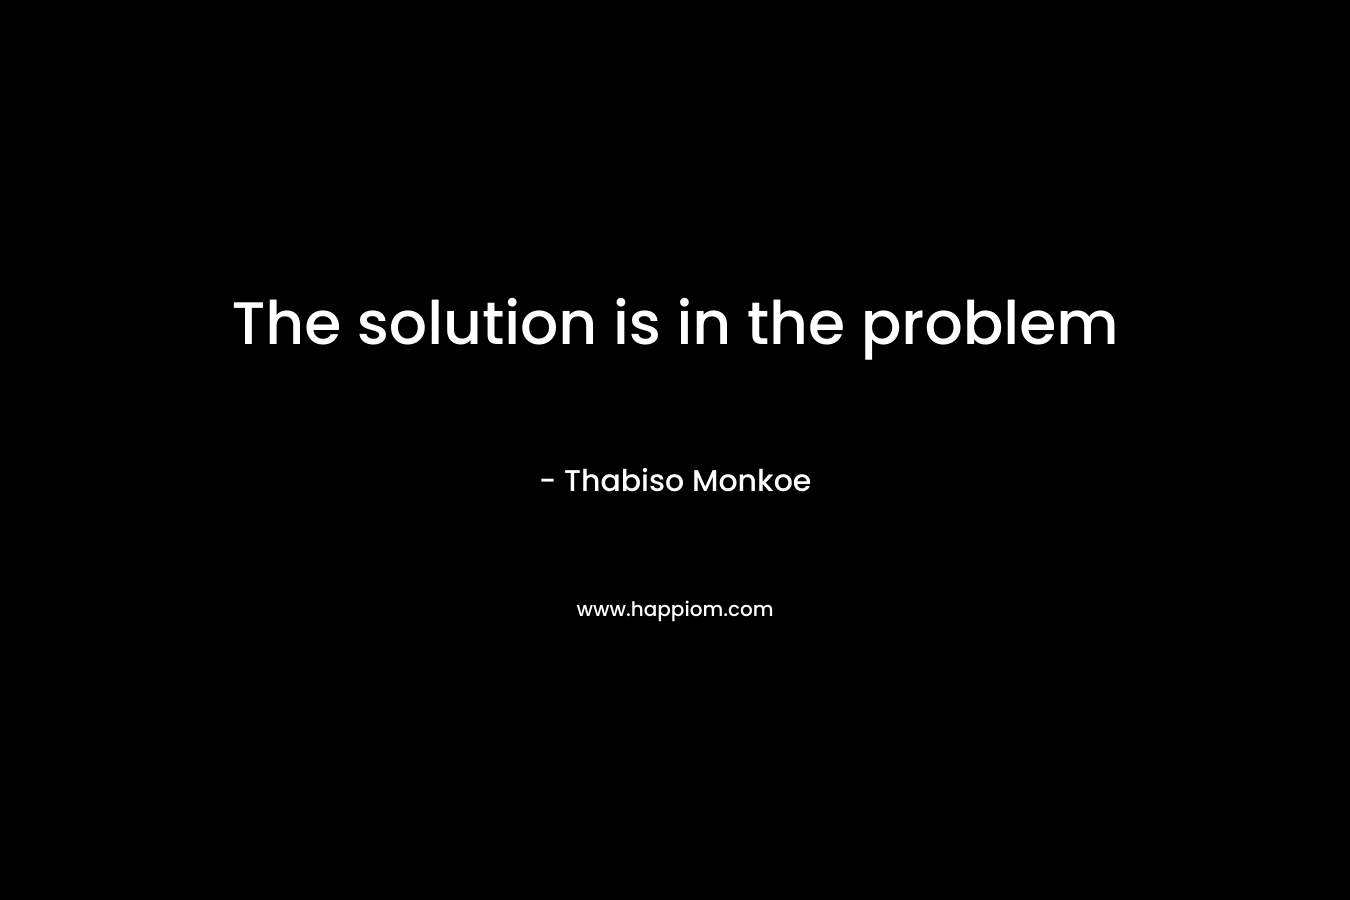 The solution is in the problem